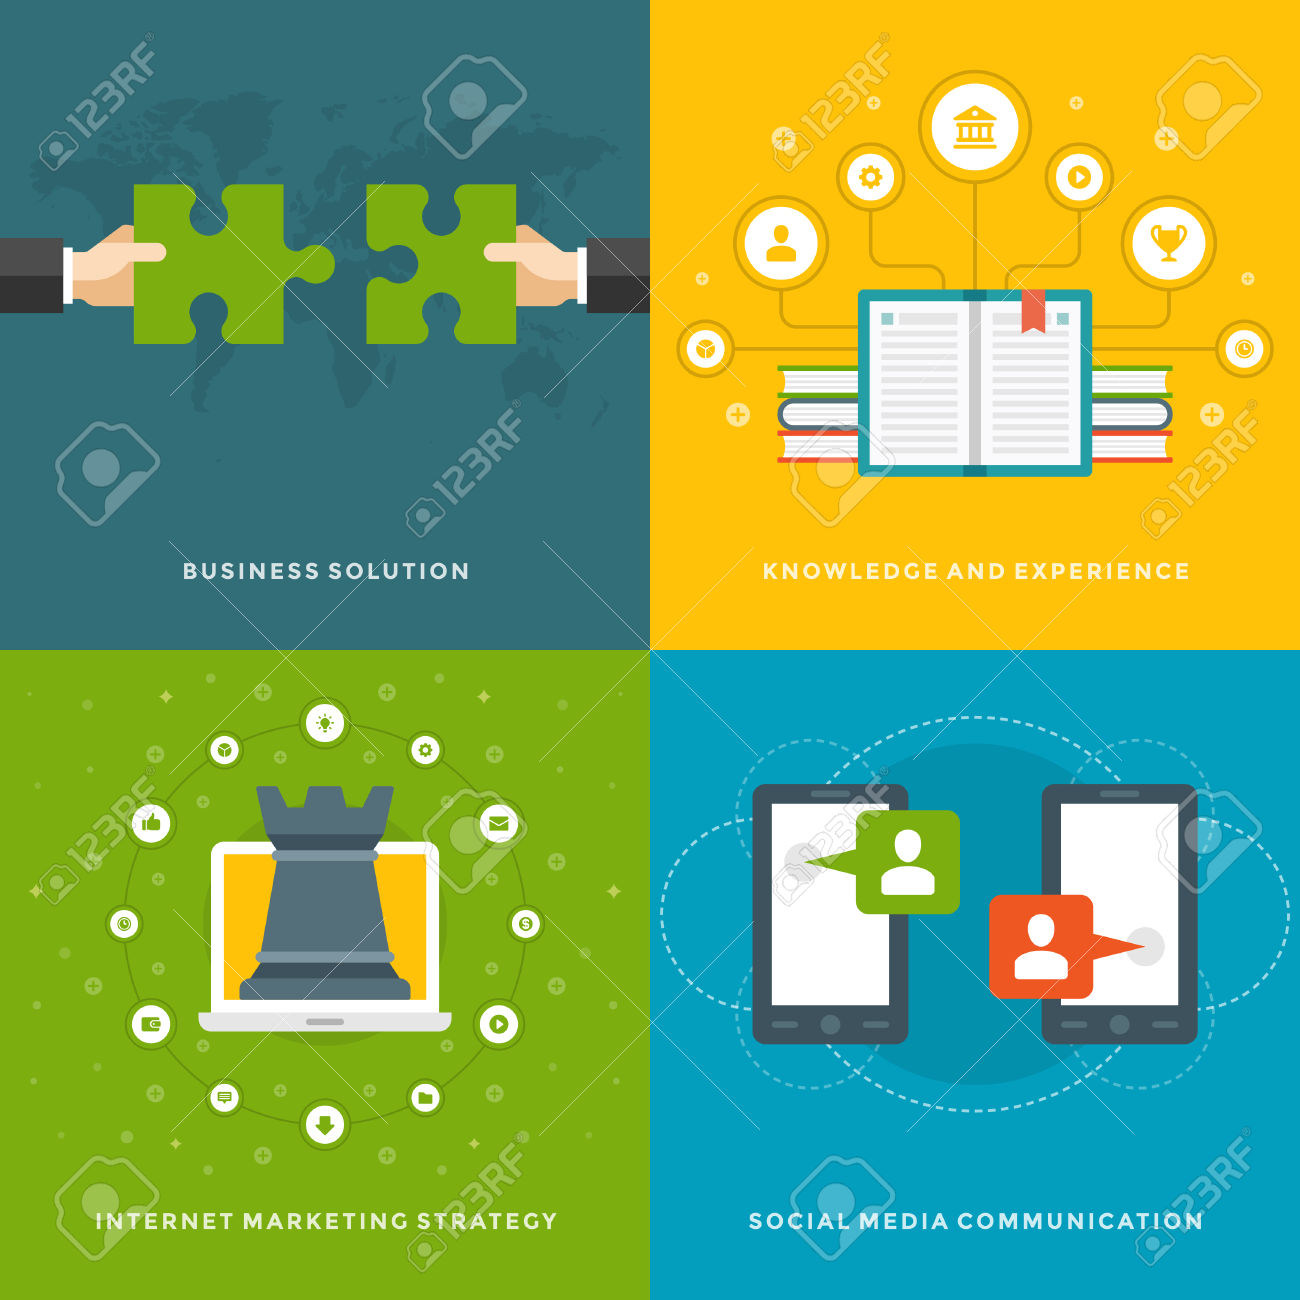 37007533-Website-Promotion-Banners-Templates-and-Flat-Icons-Design-Business-solution-Knowledge-experience-Mar-Stock-Vector.jpg